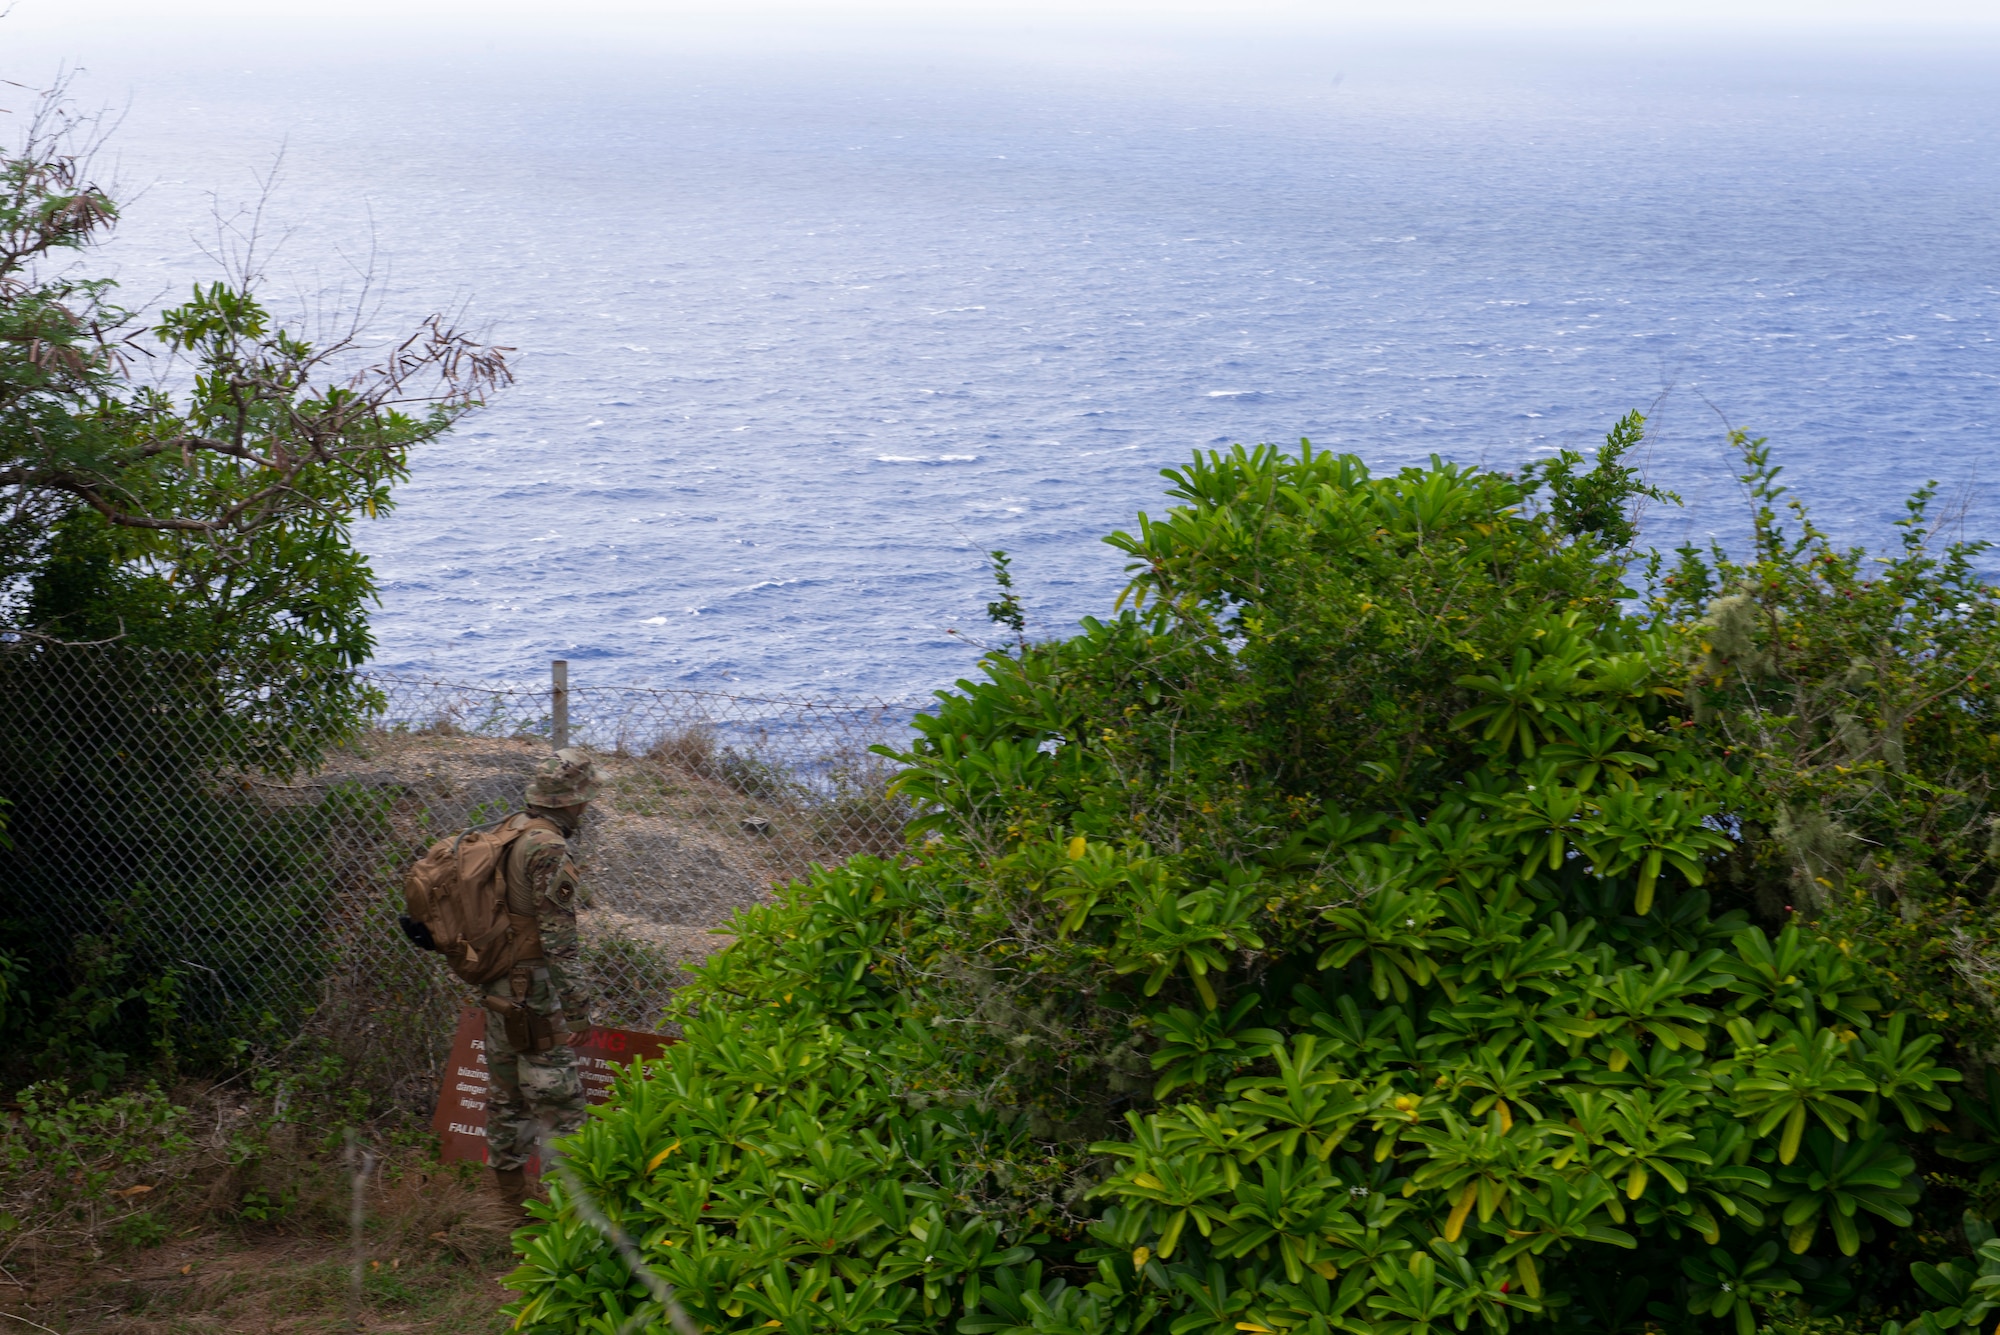 Tech. Sgt. Adam Rogers assigned to the 36th Security Forces Squadron performs a ground tasking operation overlooking a cliff face searching for signs of human activity along the eastern shoreline on Andersen Air Force Base, Guam May 14 2021. Andersen Air Force Base covers 14,600 acres, more than half of which is undeveloped land. (U.S. Air Force photo by SSgt Nicholas Crisp)